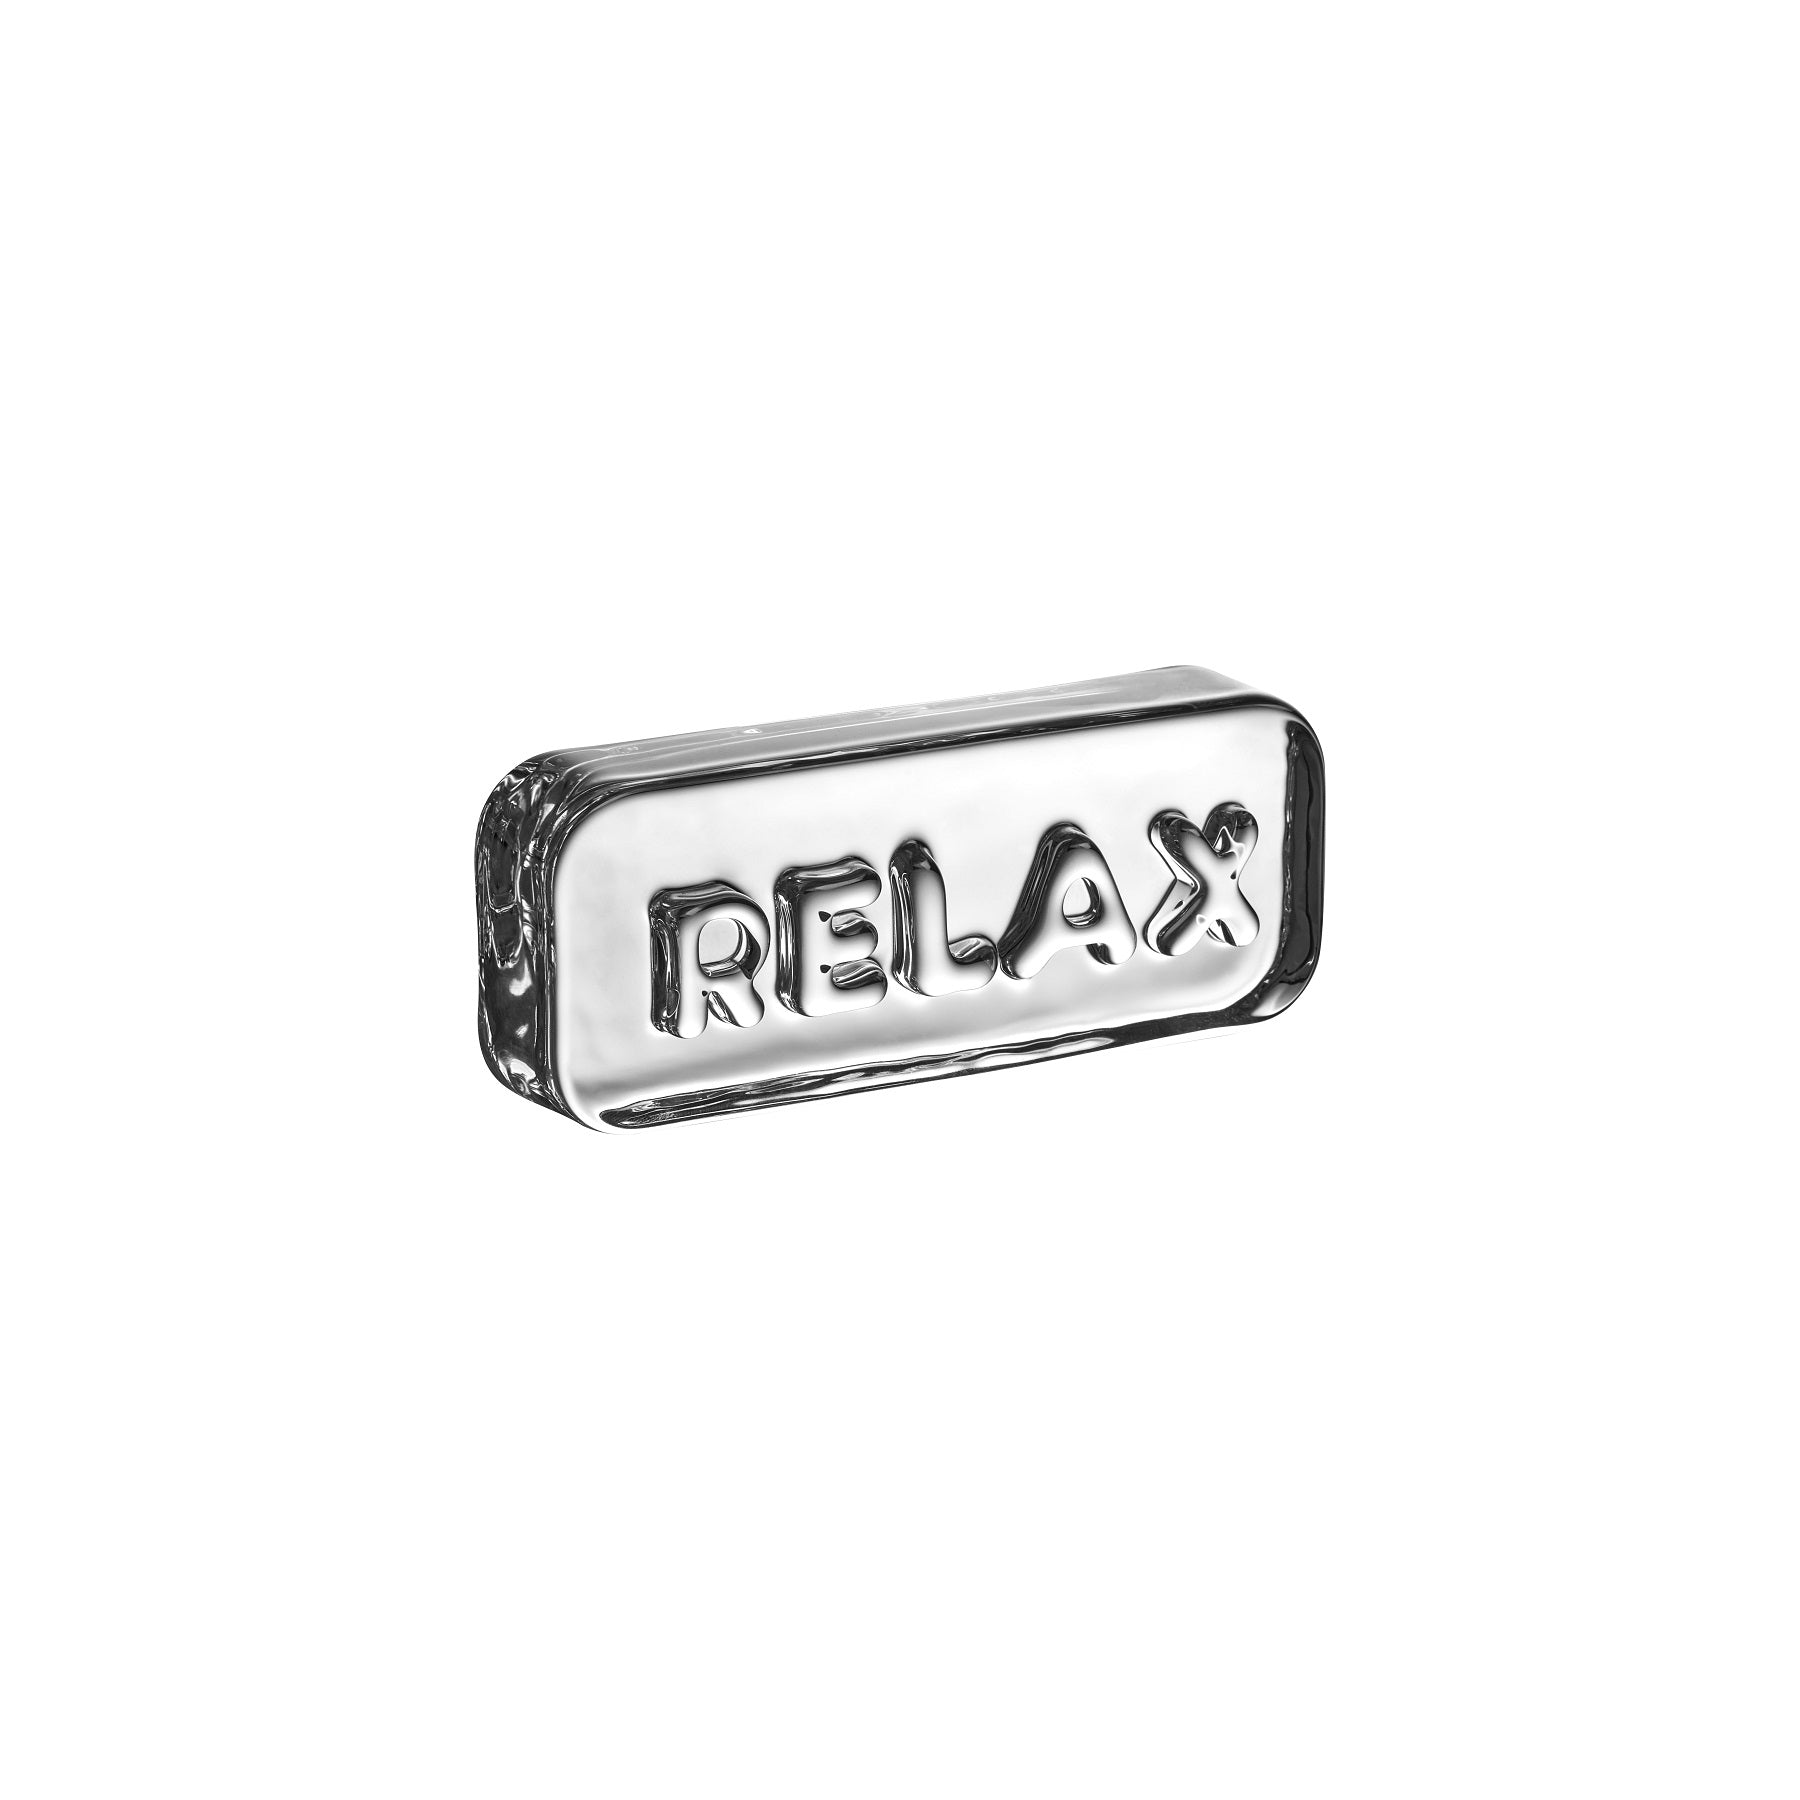 Nude Paroles "Relax" Paperweight 6 1/2" x 2 1/2" x 1 1/2"